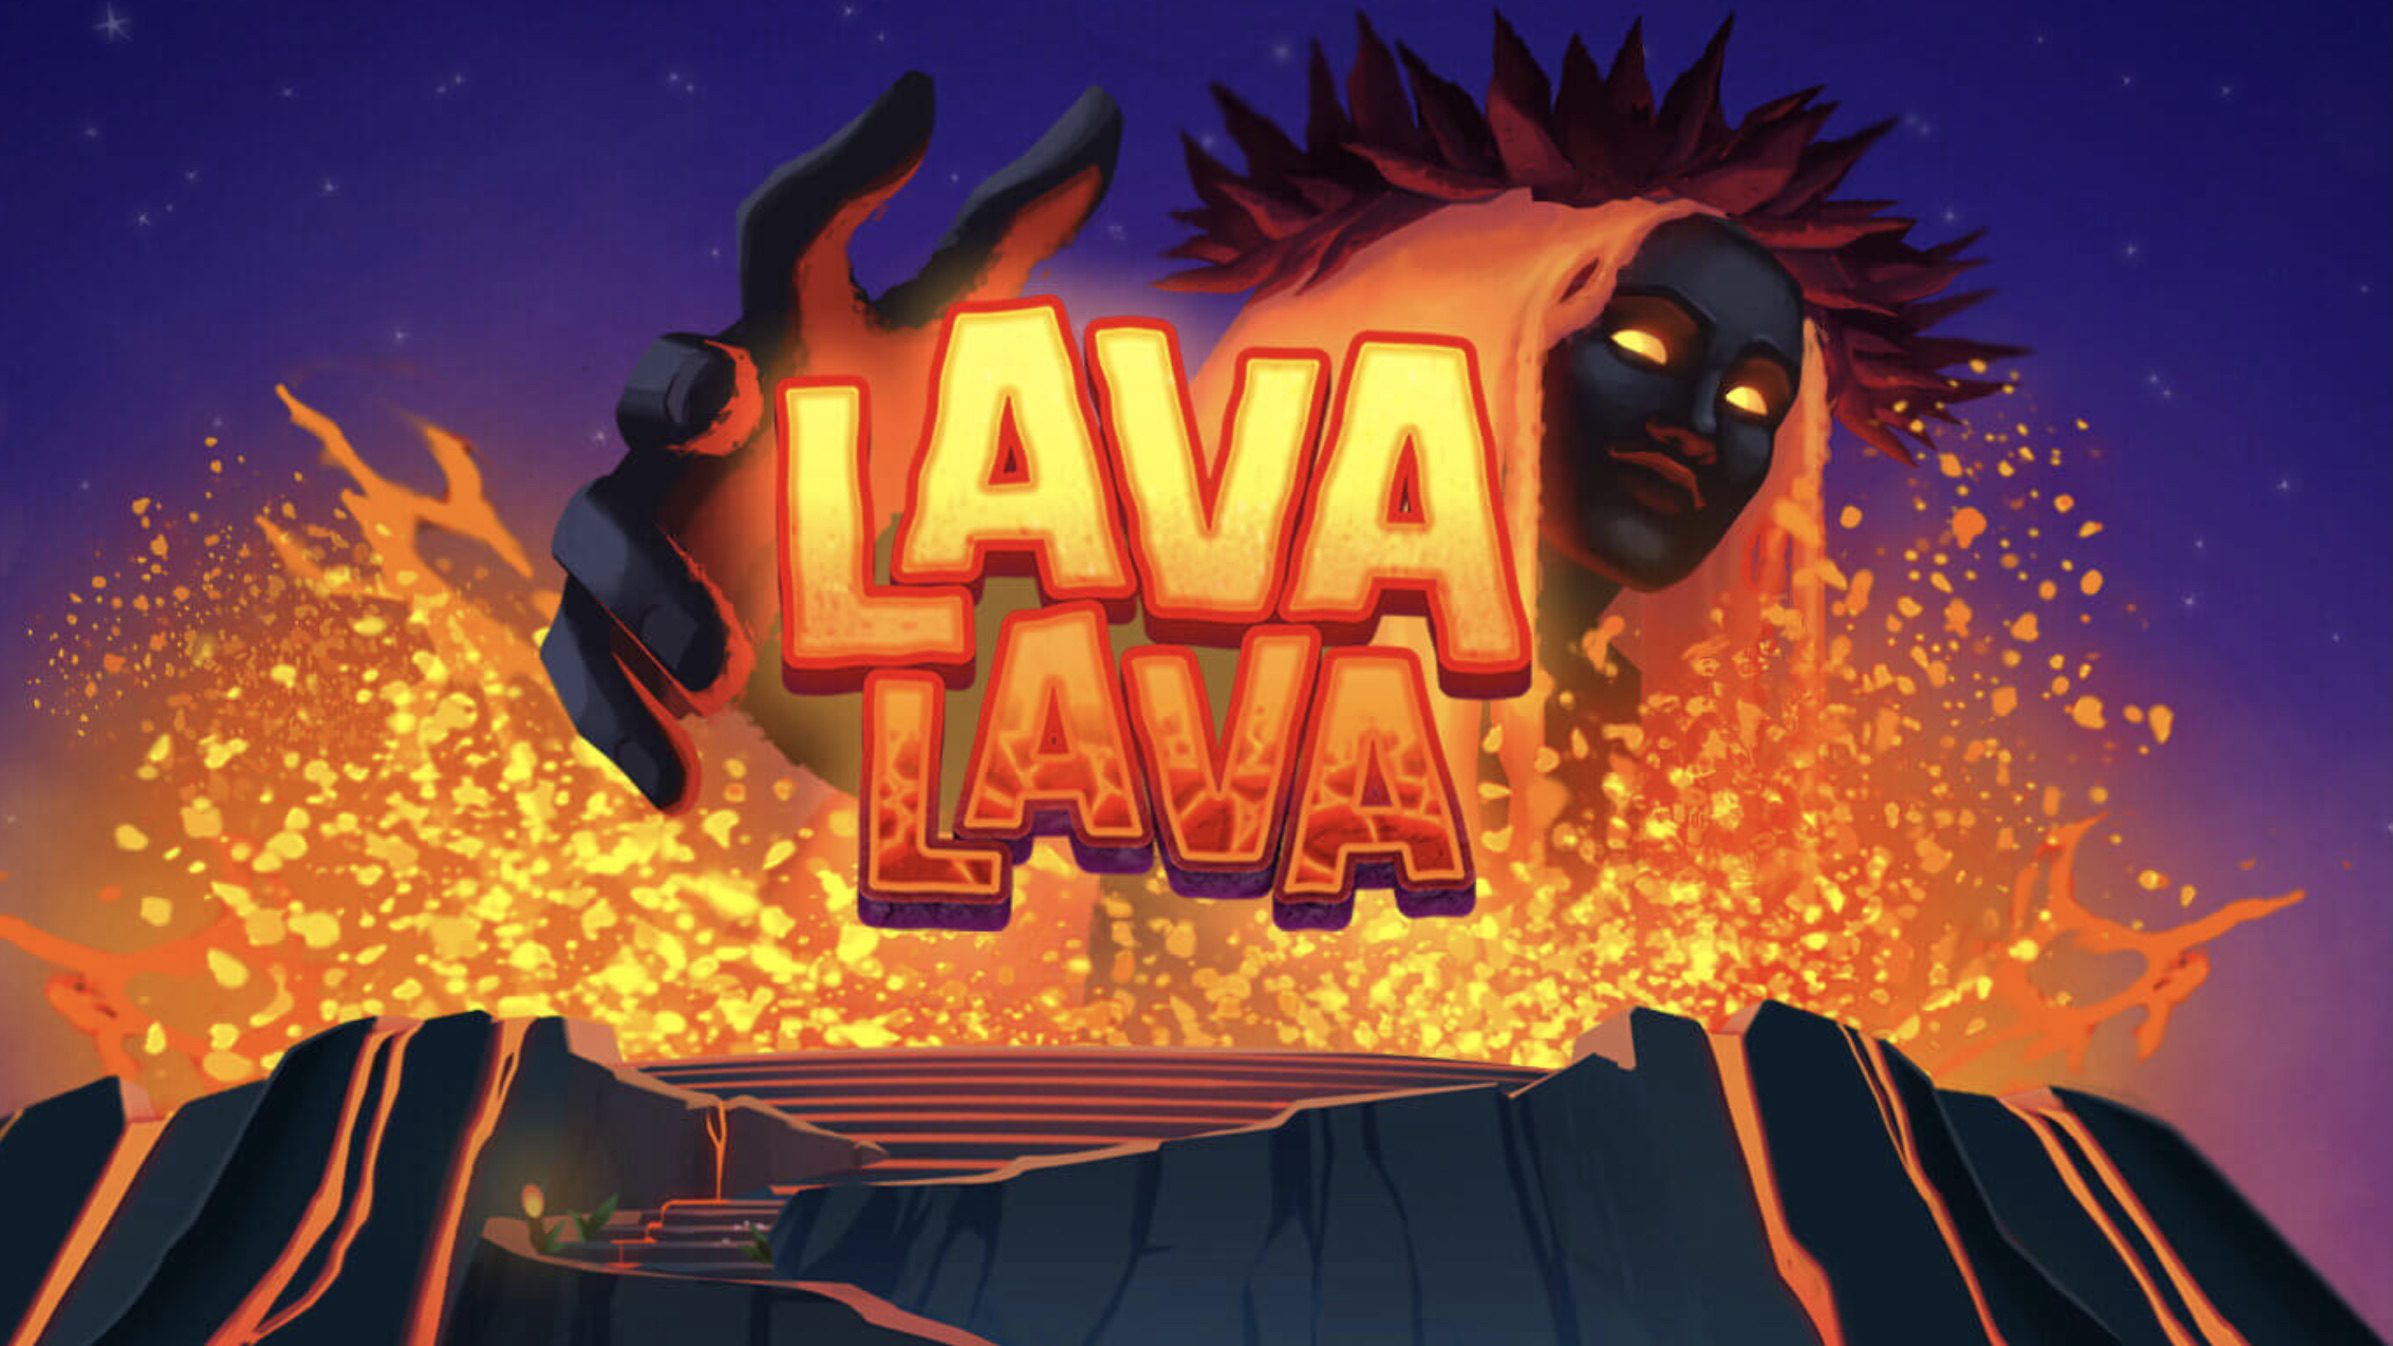 Lava Lava is a 5x3, 15-payline video slot that incorporates a maximum win potential of up to x10,000 the bet. 